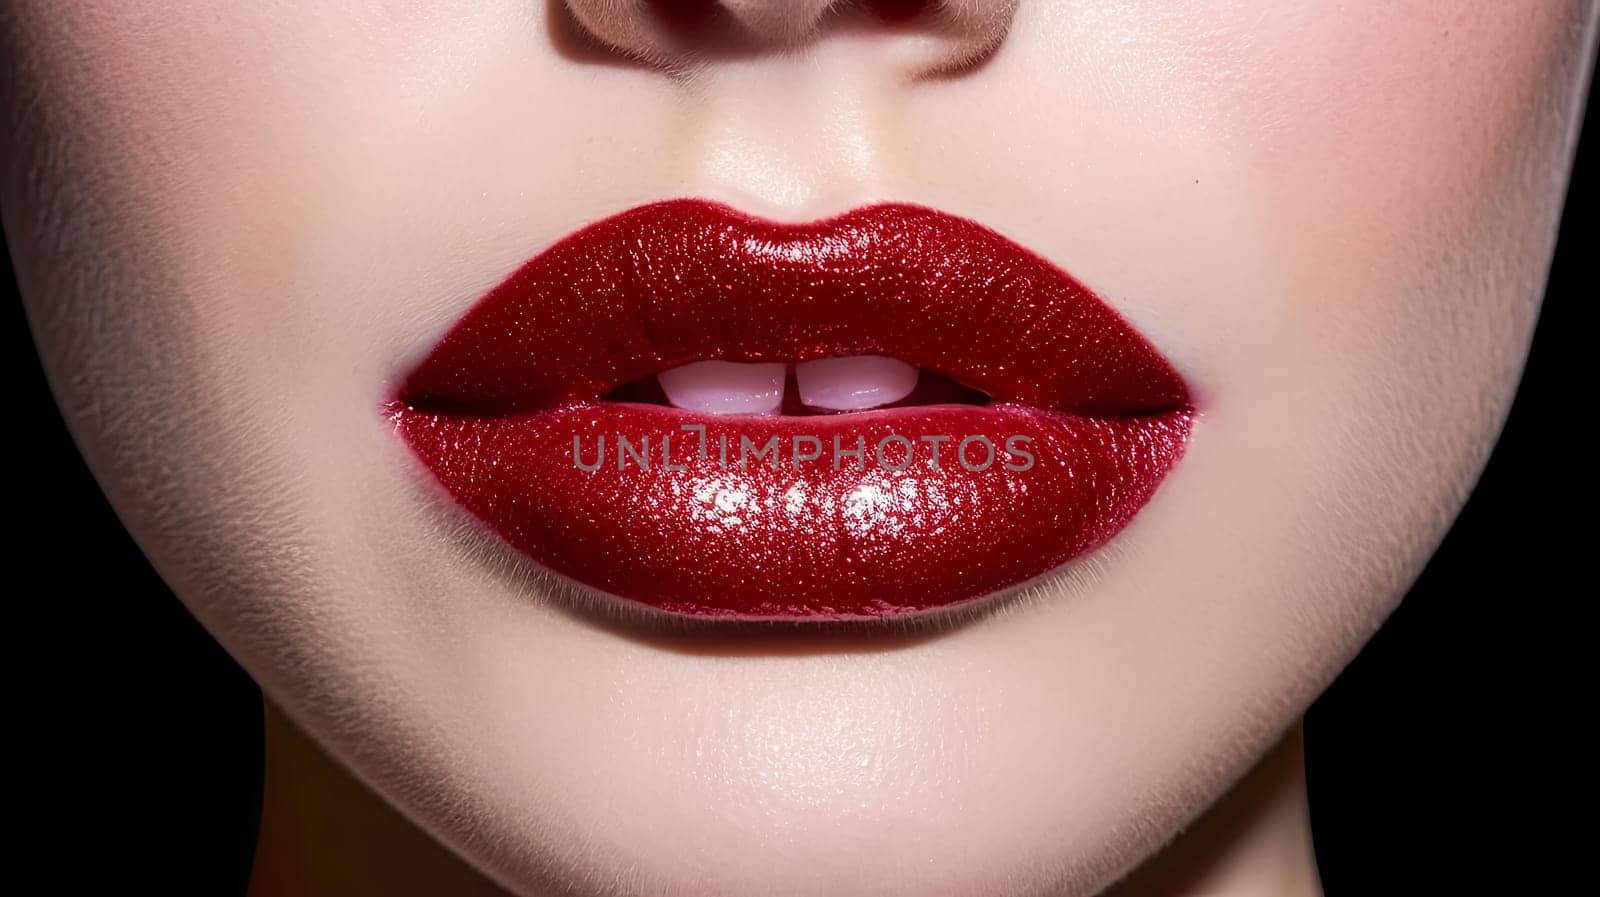 A woman's lips are painted red with glitter. Concept of glamour and sophistication